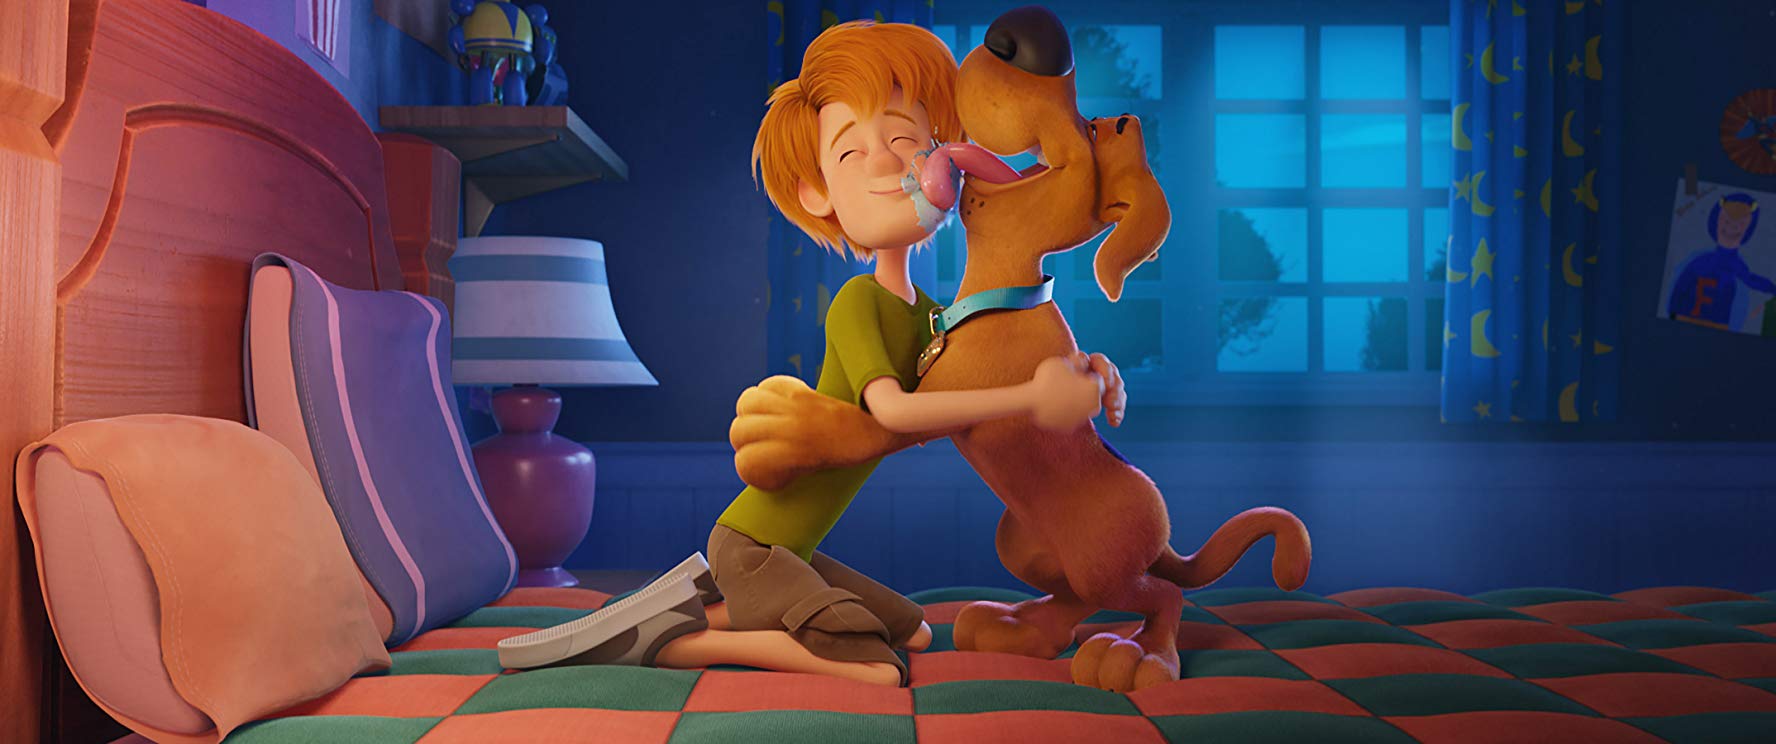 Scoob! (2020): Everything we Know